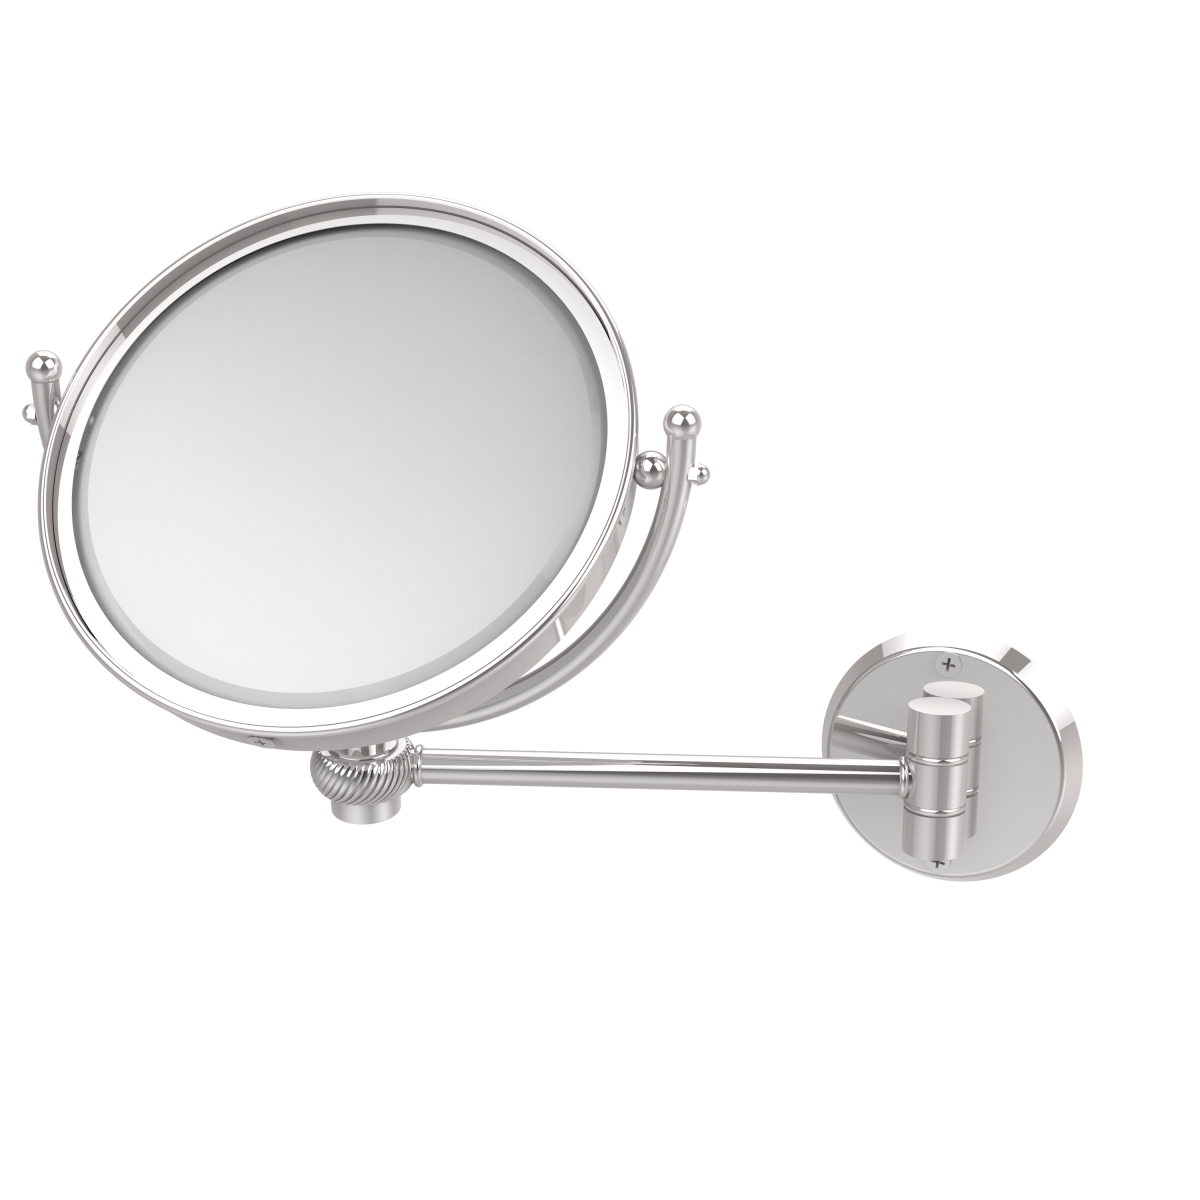 WM-5T-4X-PC 8 in. Wall Mounted Make-Up Mirror 4X Magnification, Polished Chrome - 10 x 8 x 11 in -  Allied Brass, WM-5T/4X-PC